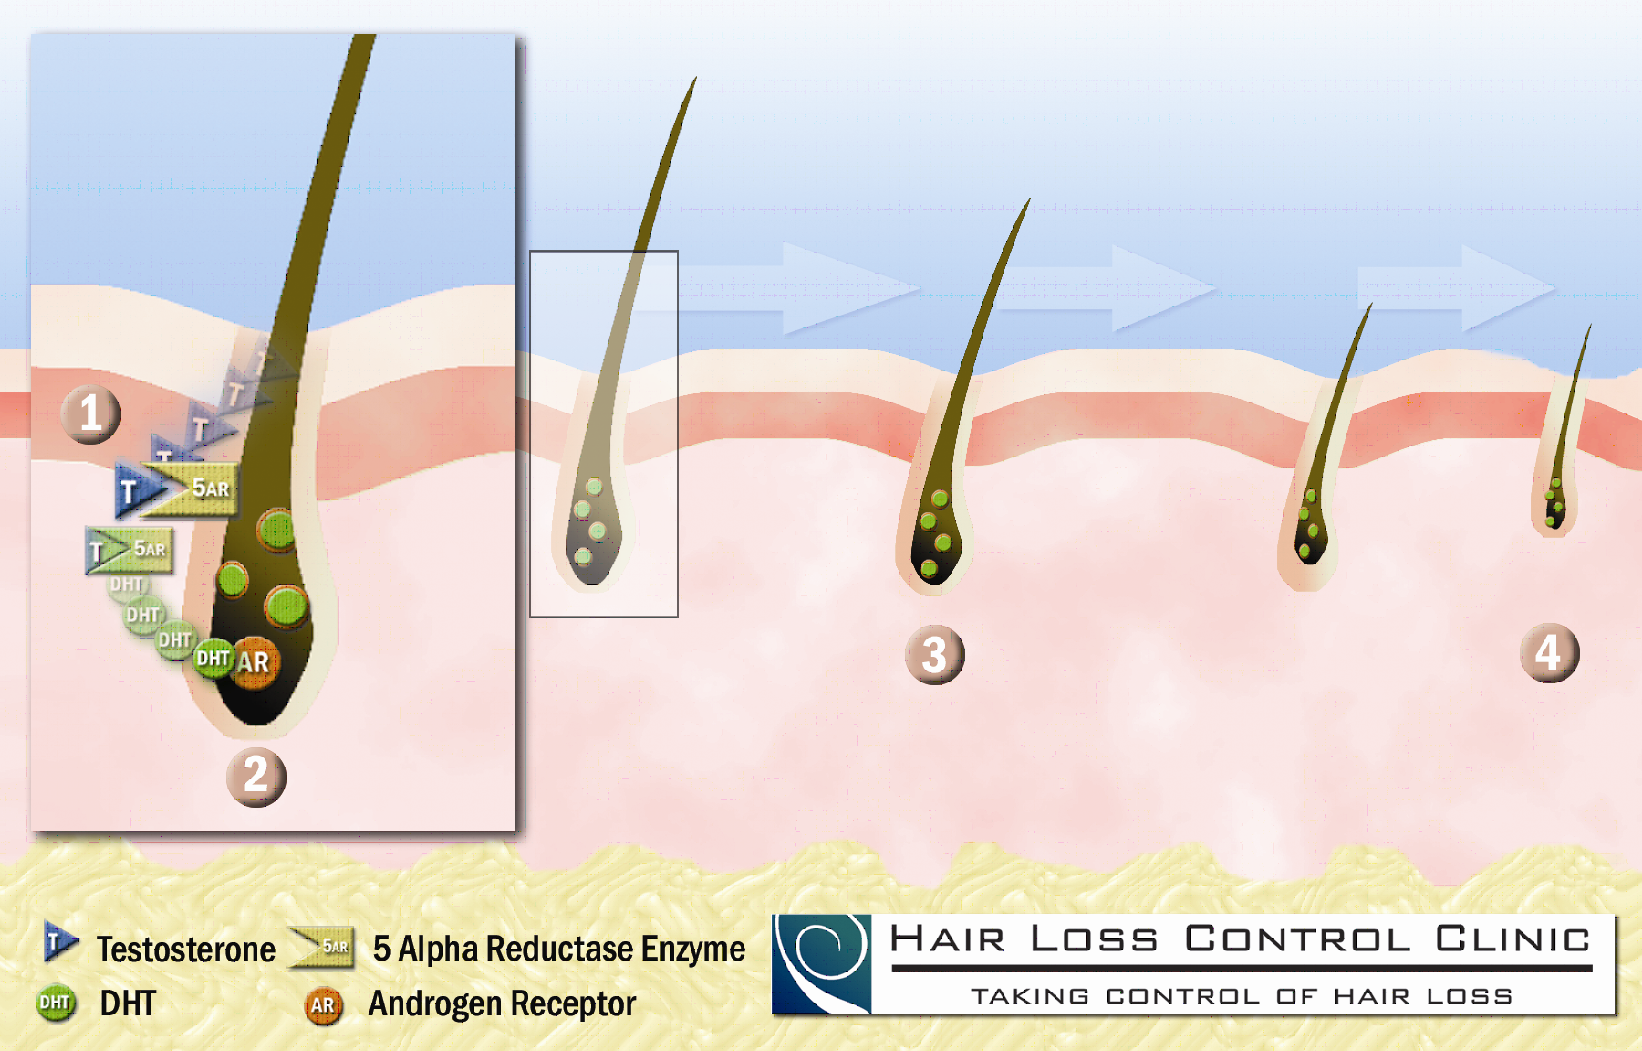 AA – Complete Information – Restorative Therapeutic Hair Loss Control & HAIR  Replacements Services